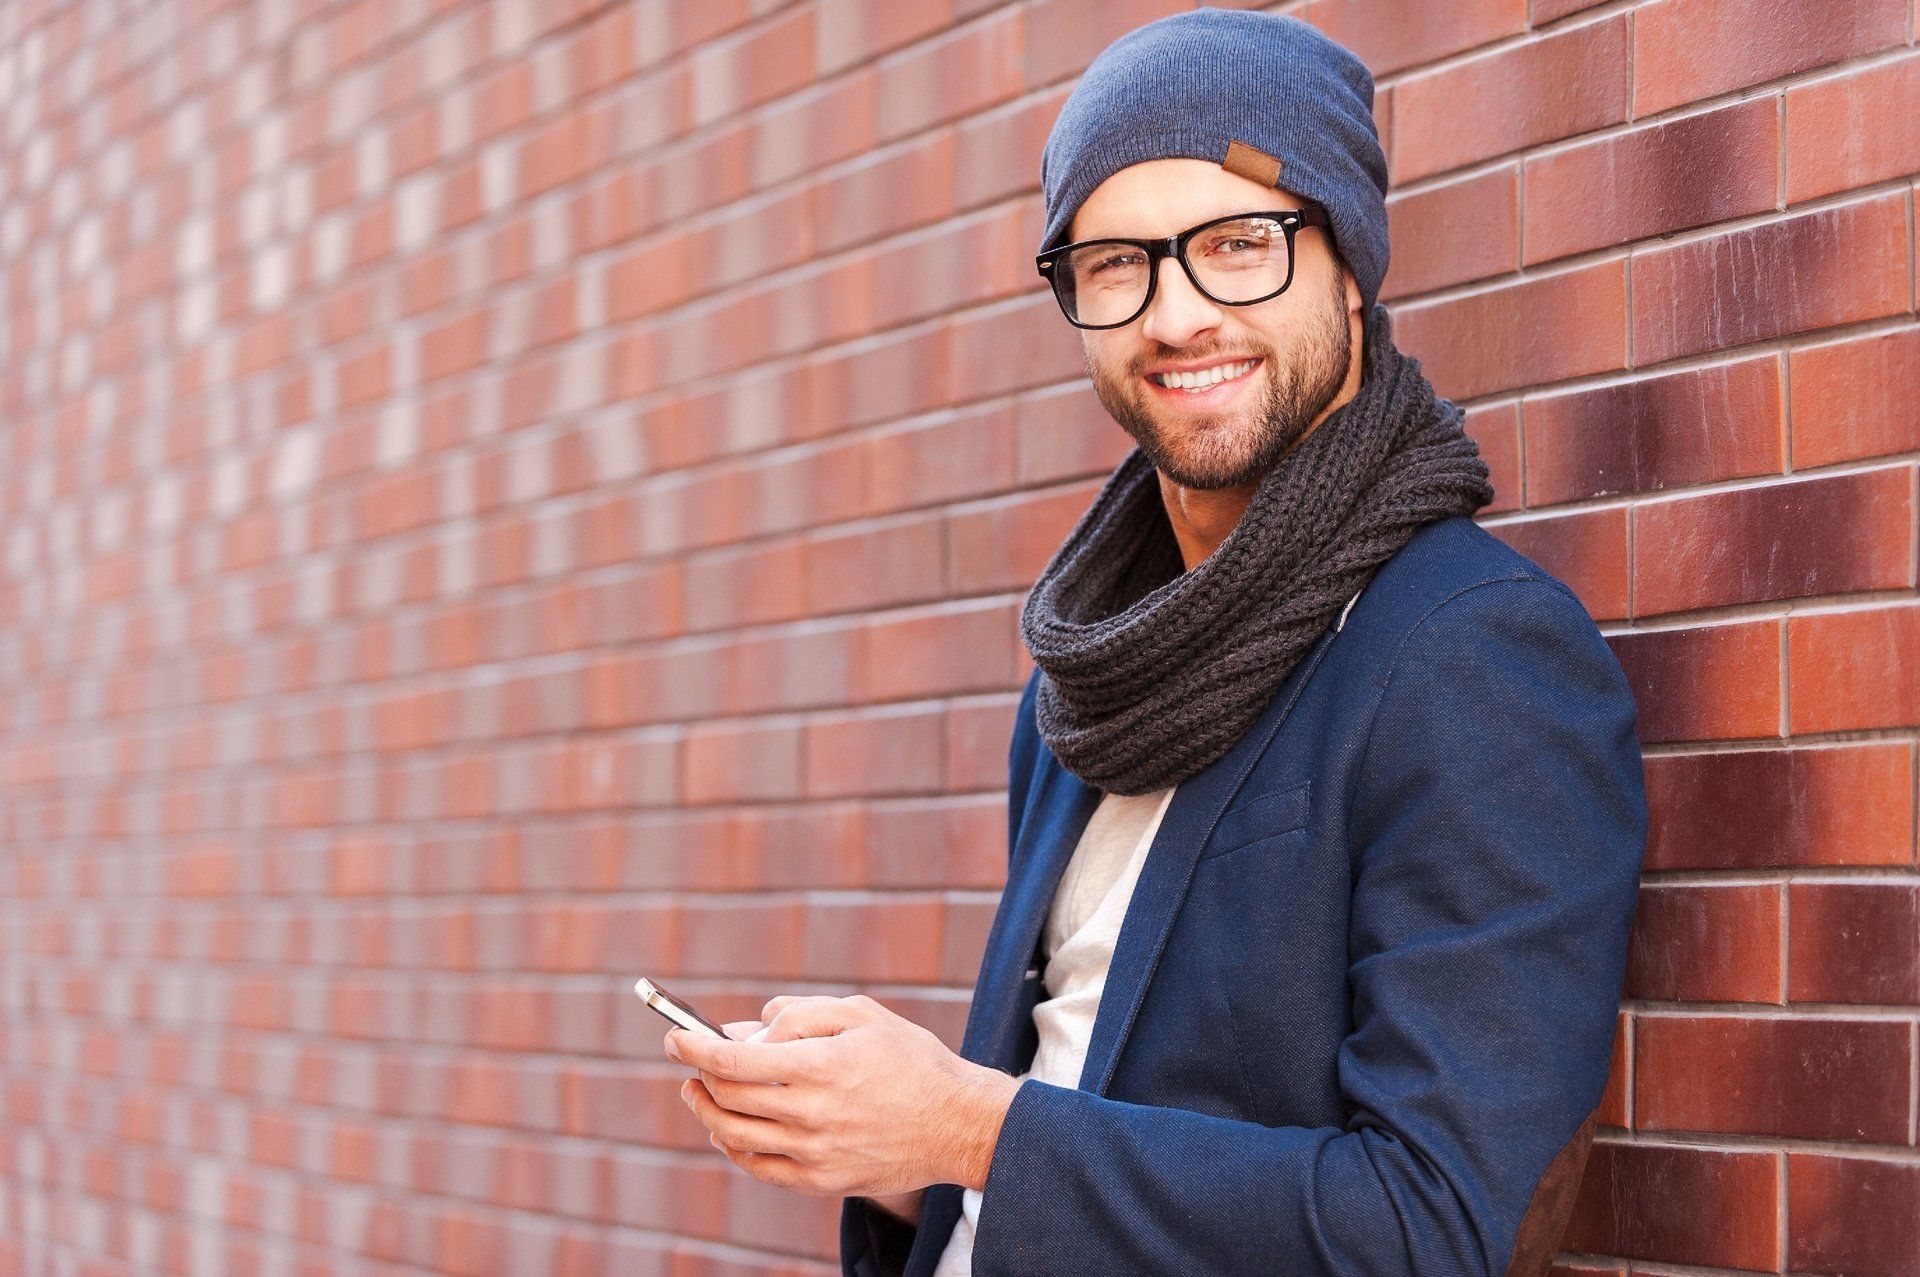 Man holding mobile phone leaning against brick wall